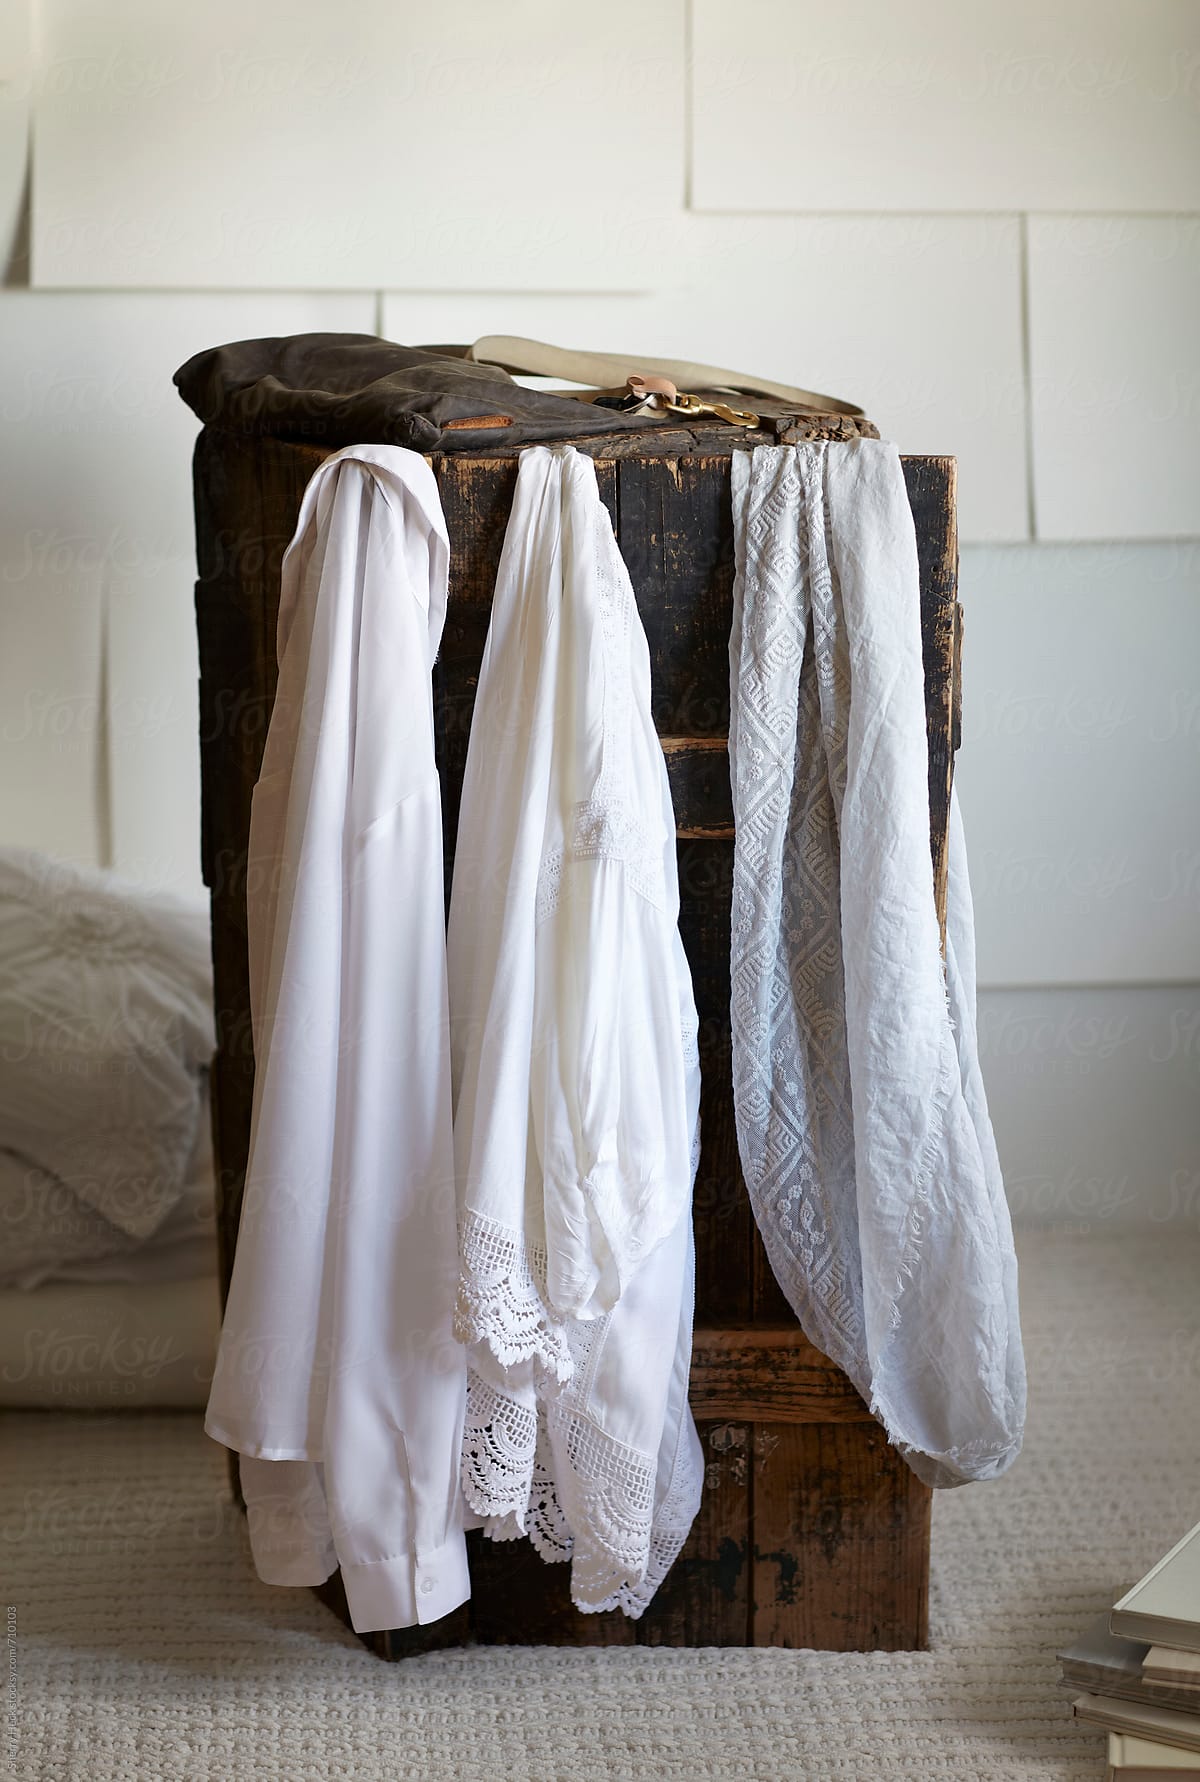 White hanging shirts on an old wood trunk in white paper room